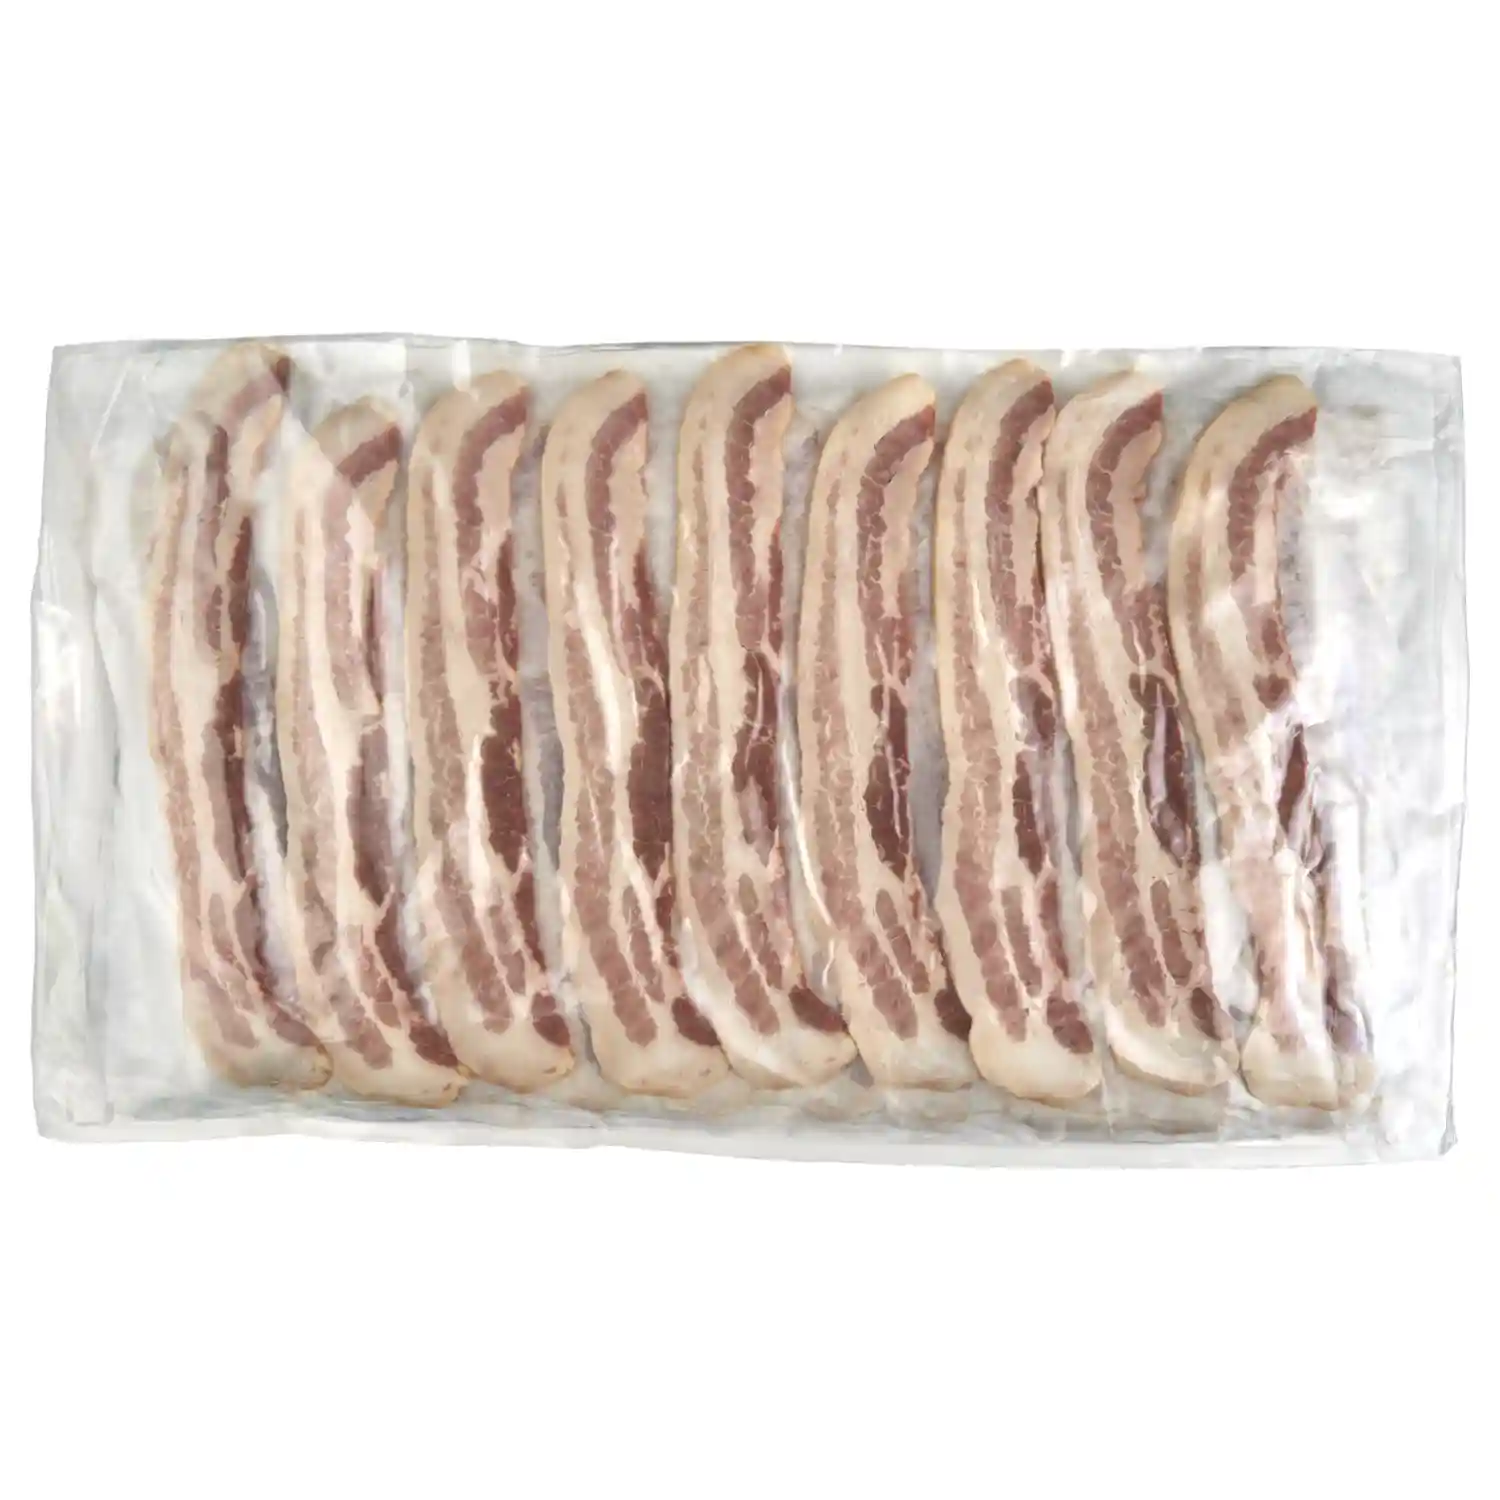 Wright® Brand Naturally Applewood Smoked Thin Sliced Bacon, Flat-Pack®, 15Lbs, 18-22 Slices per pound, Gas Flushed_image_31